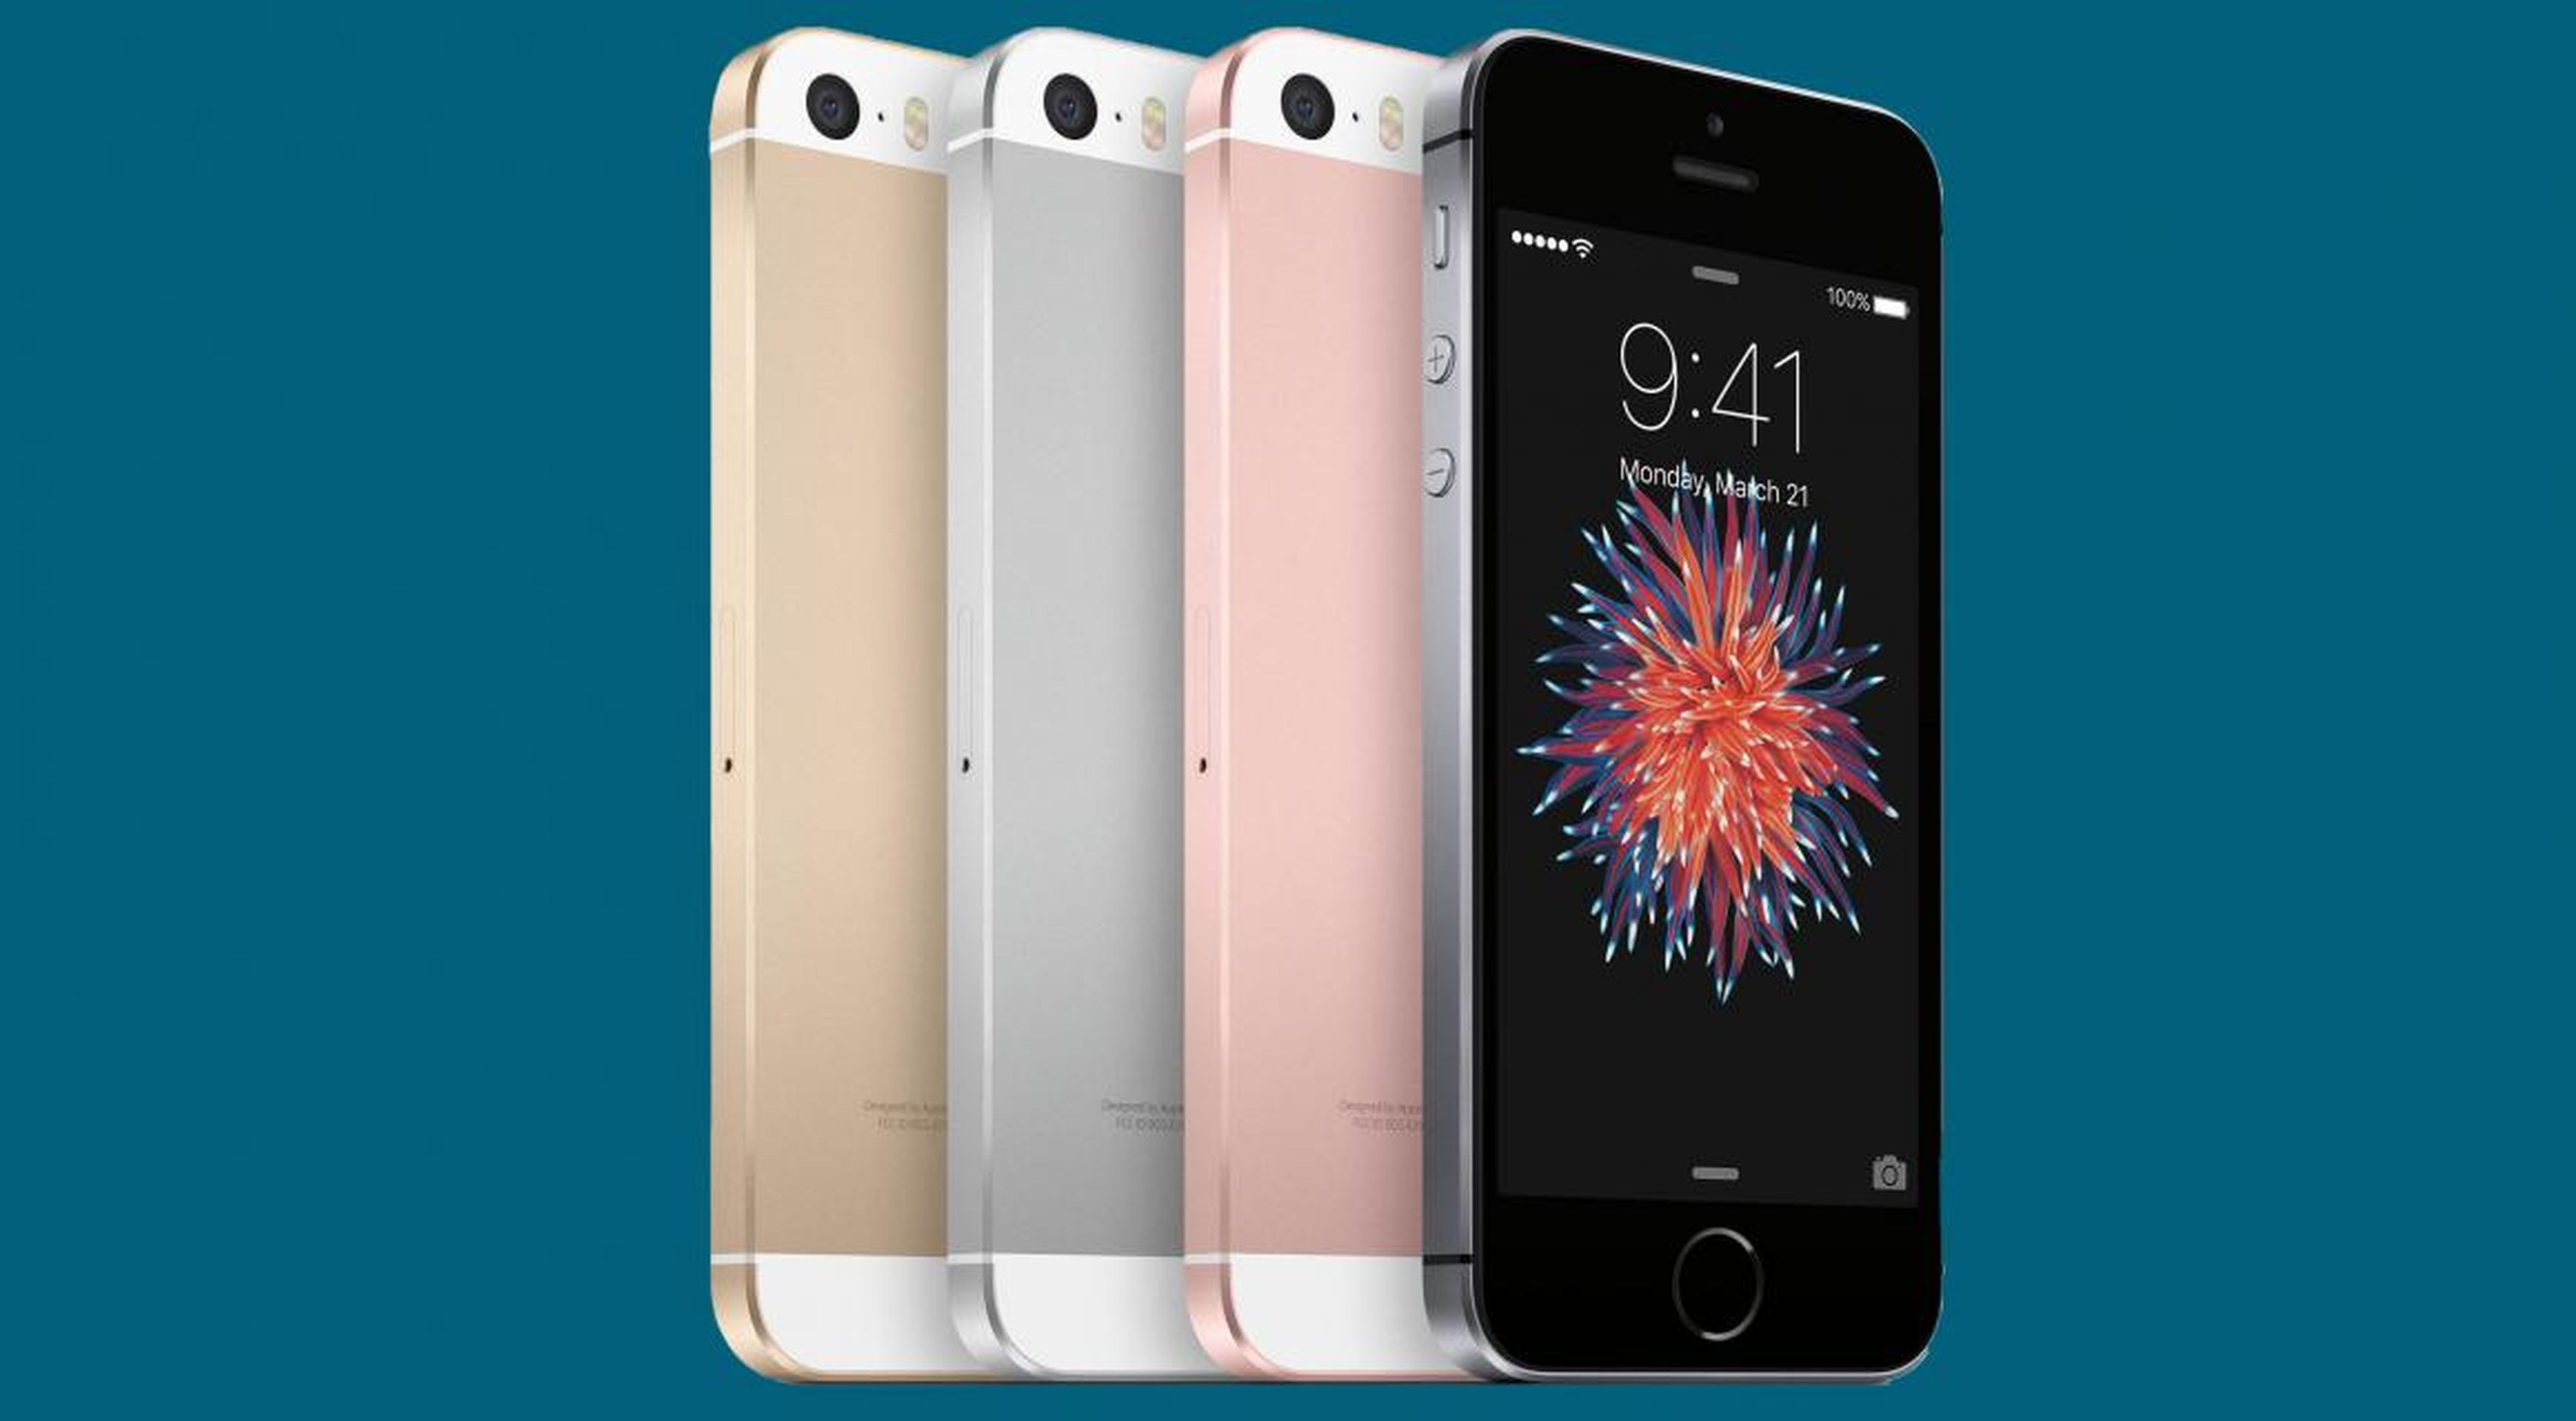 1. The iPhone SE is remarkably affordable, at just $350 to start.